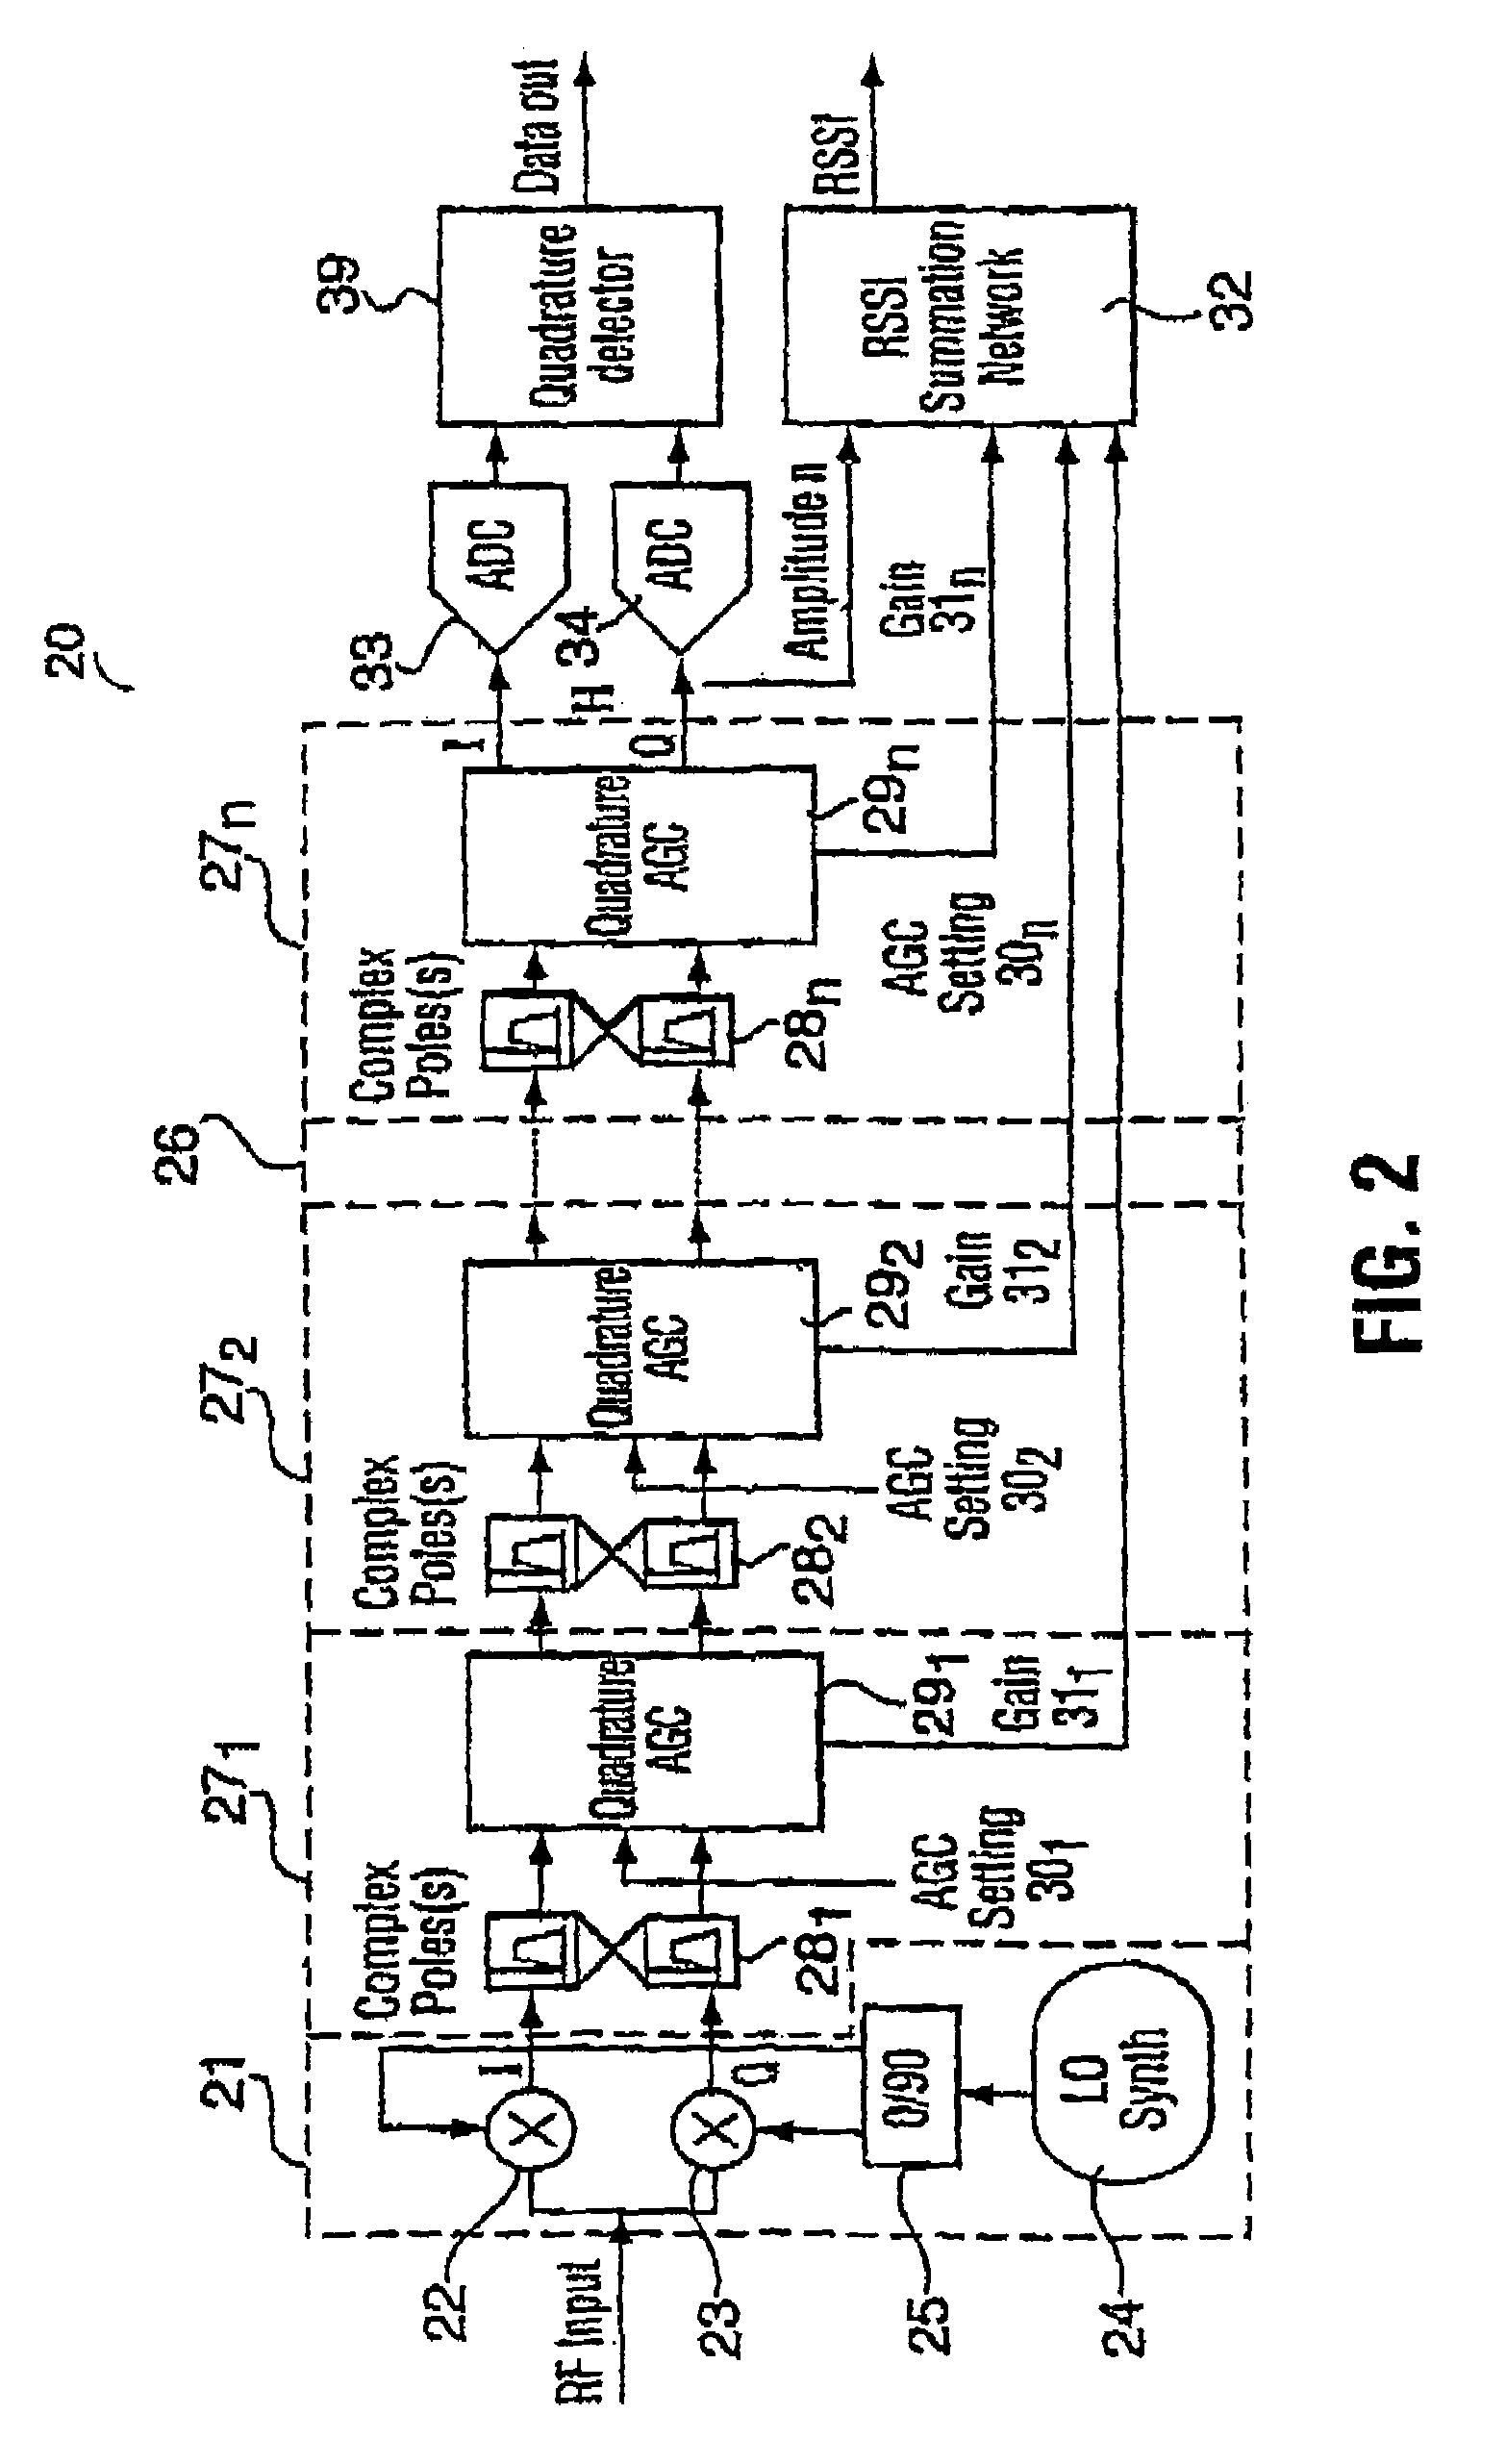 Complex filtering/AGC radio receiver architecture for low-IF or zero-IF